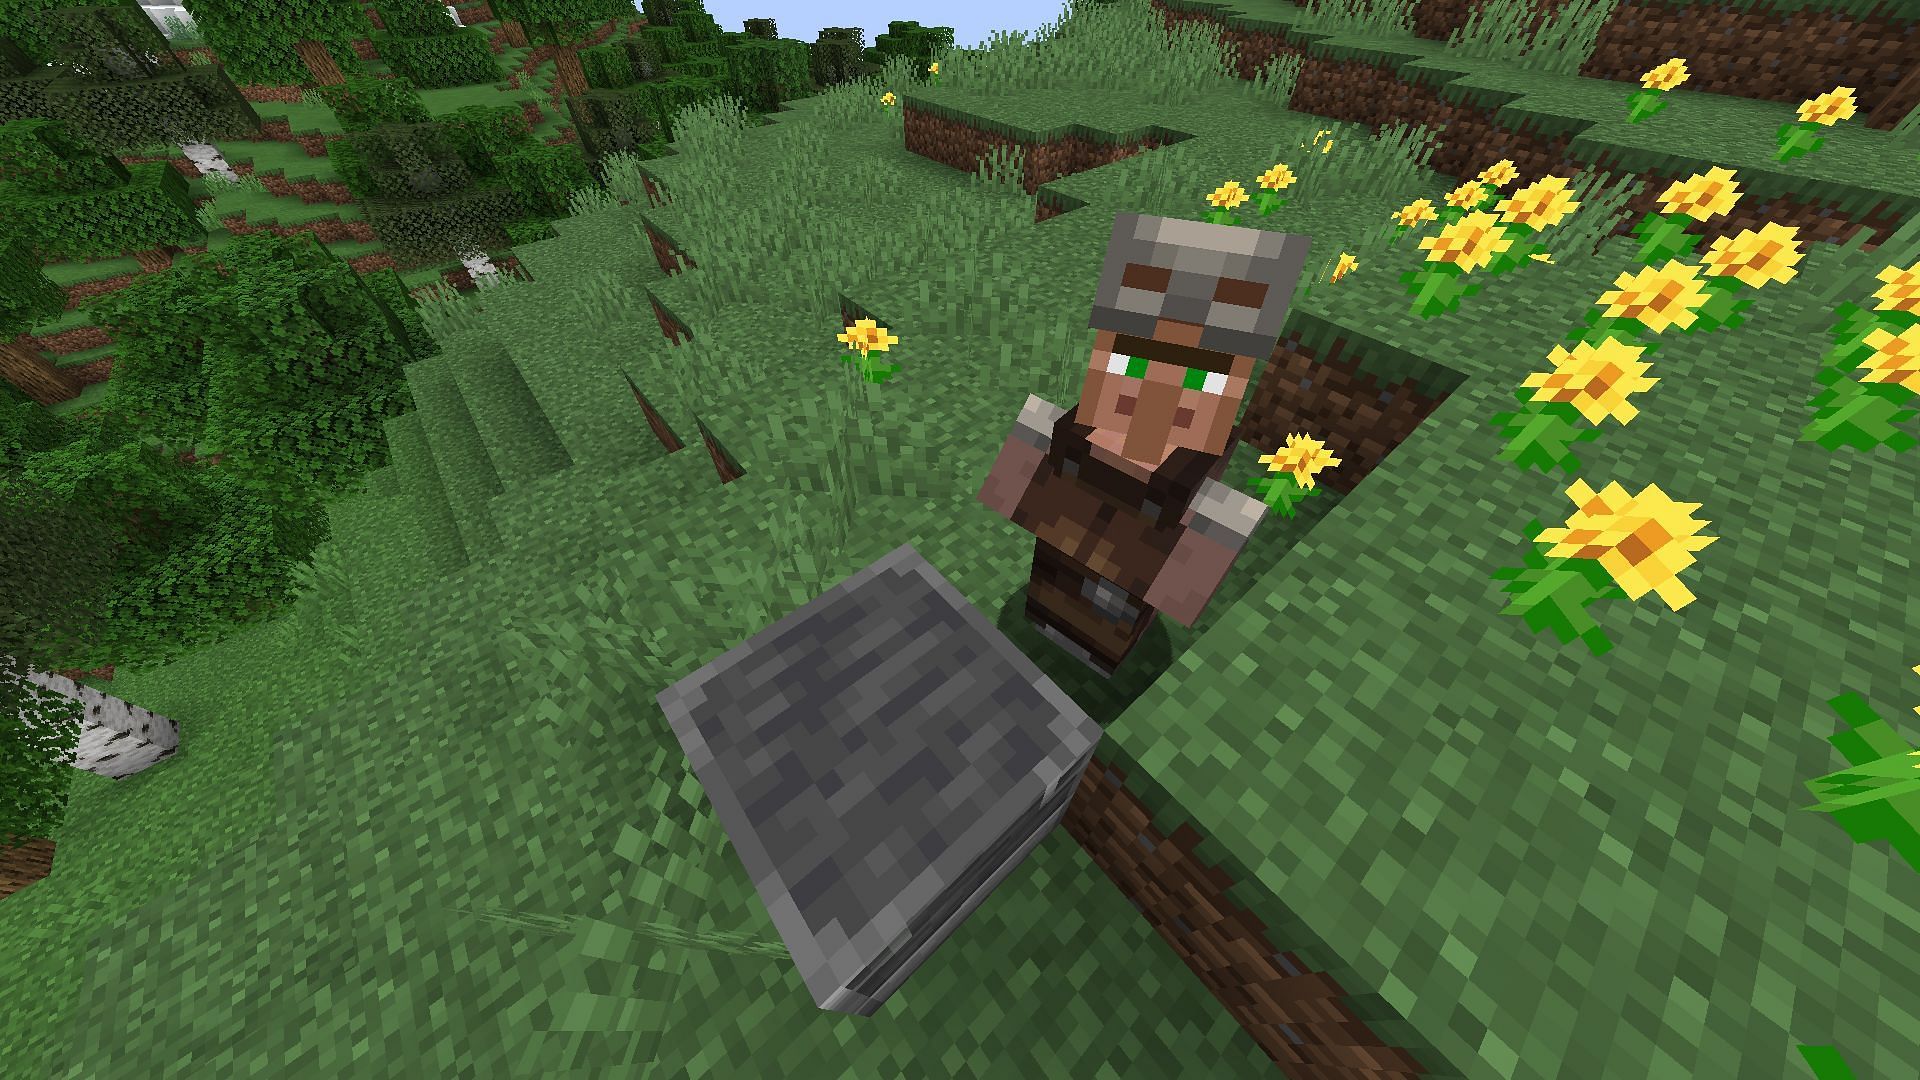 Armorer takes 36 emeralds just for one bell (Image via Mojang Studios)